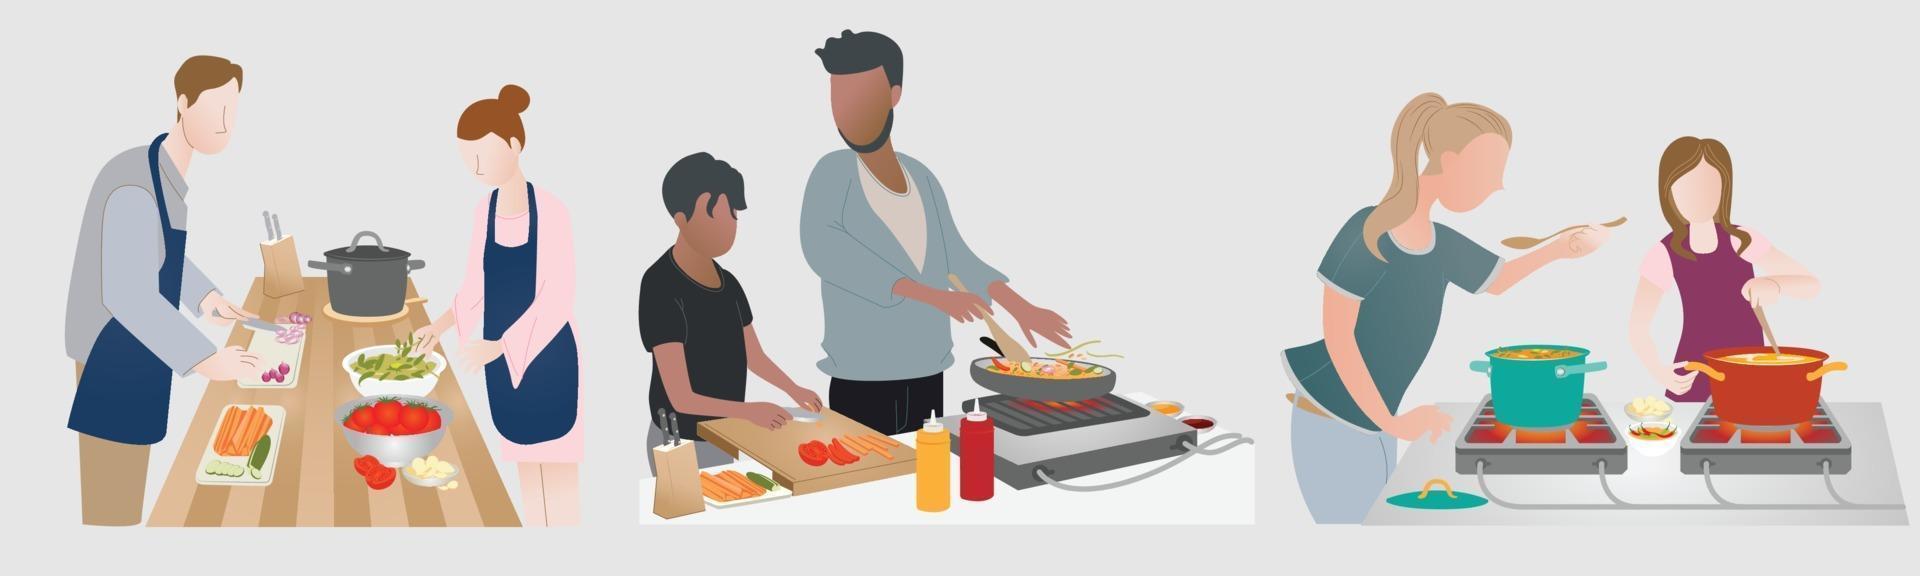 Couple of 3 families preparing food for their meal. Preparation food for making dish. Enjoy hobbies vector